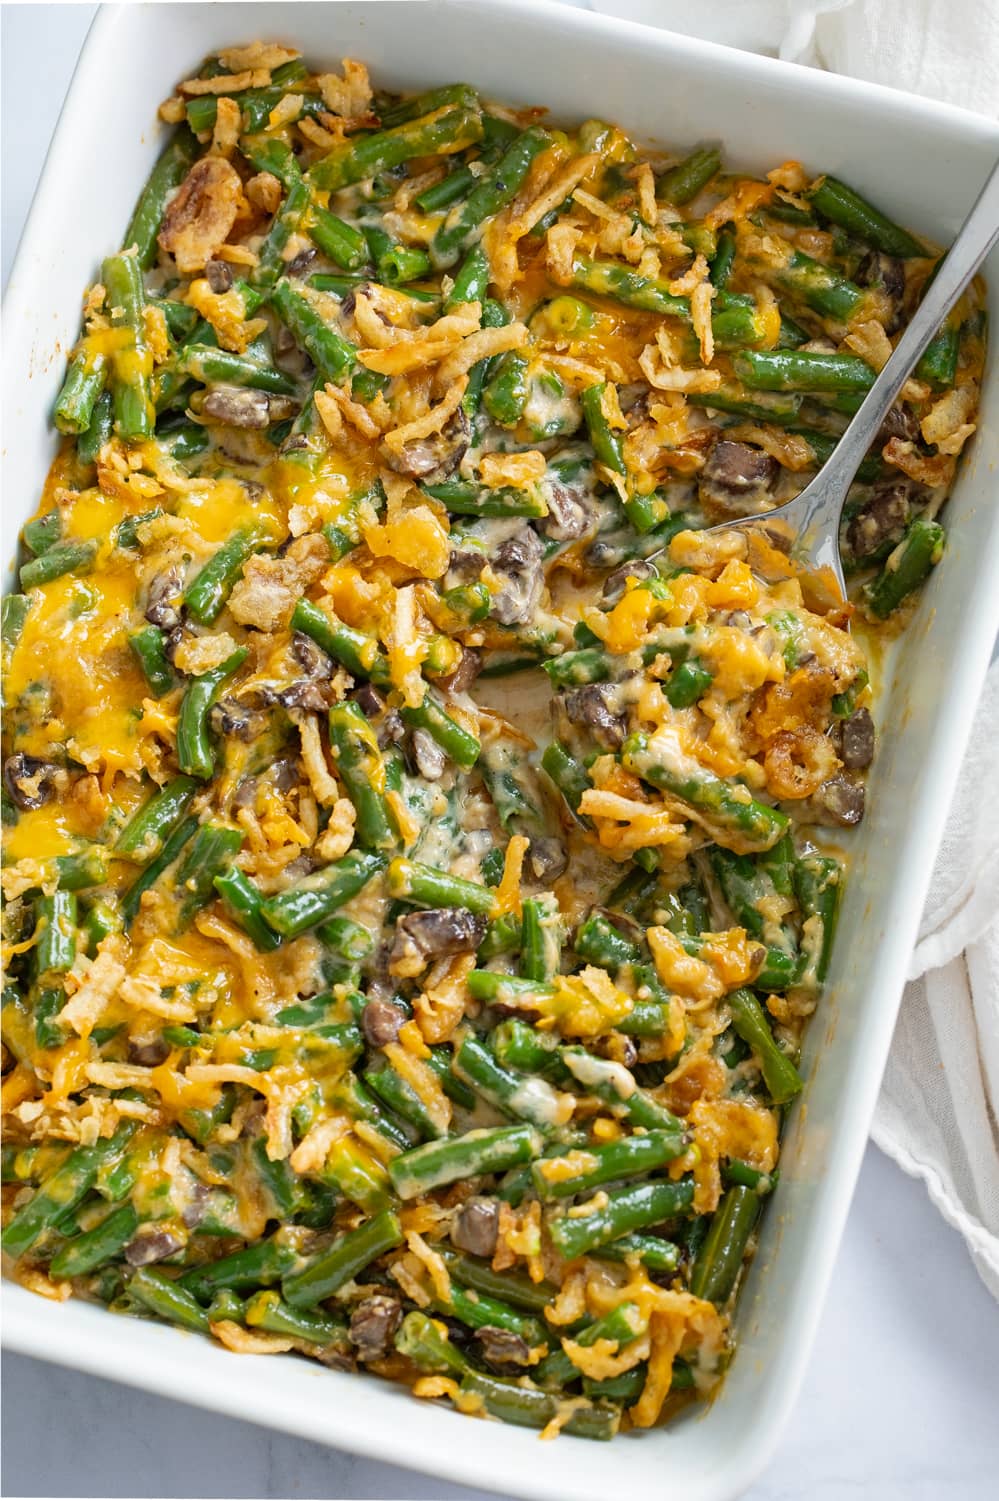 Green Bean Casserole in a white casserole dish with a spoon.